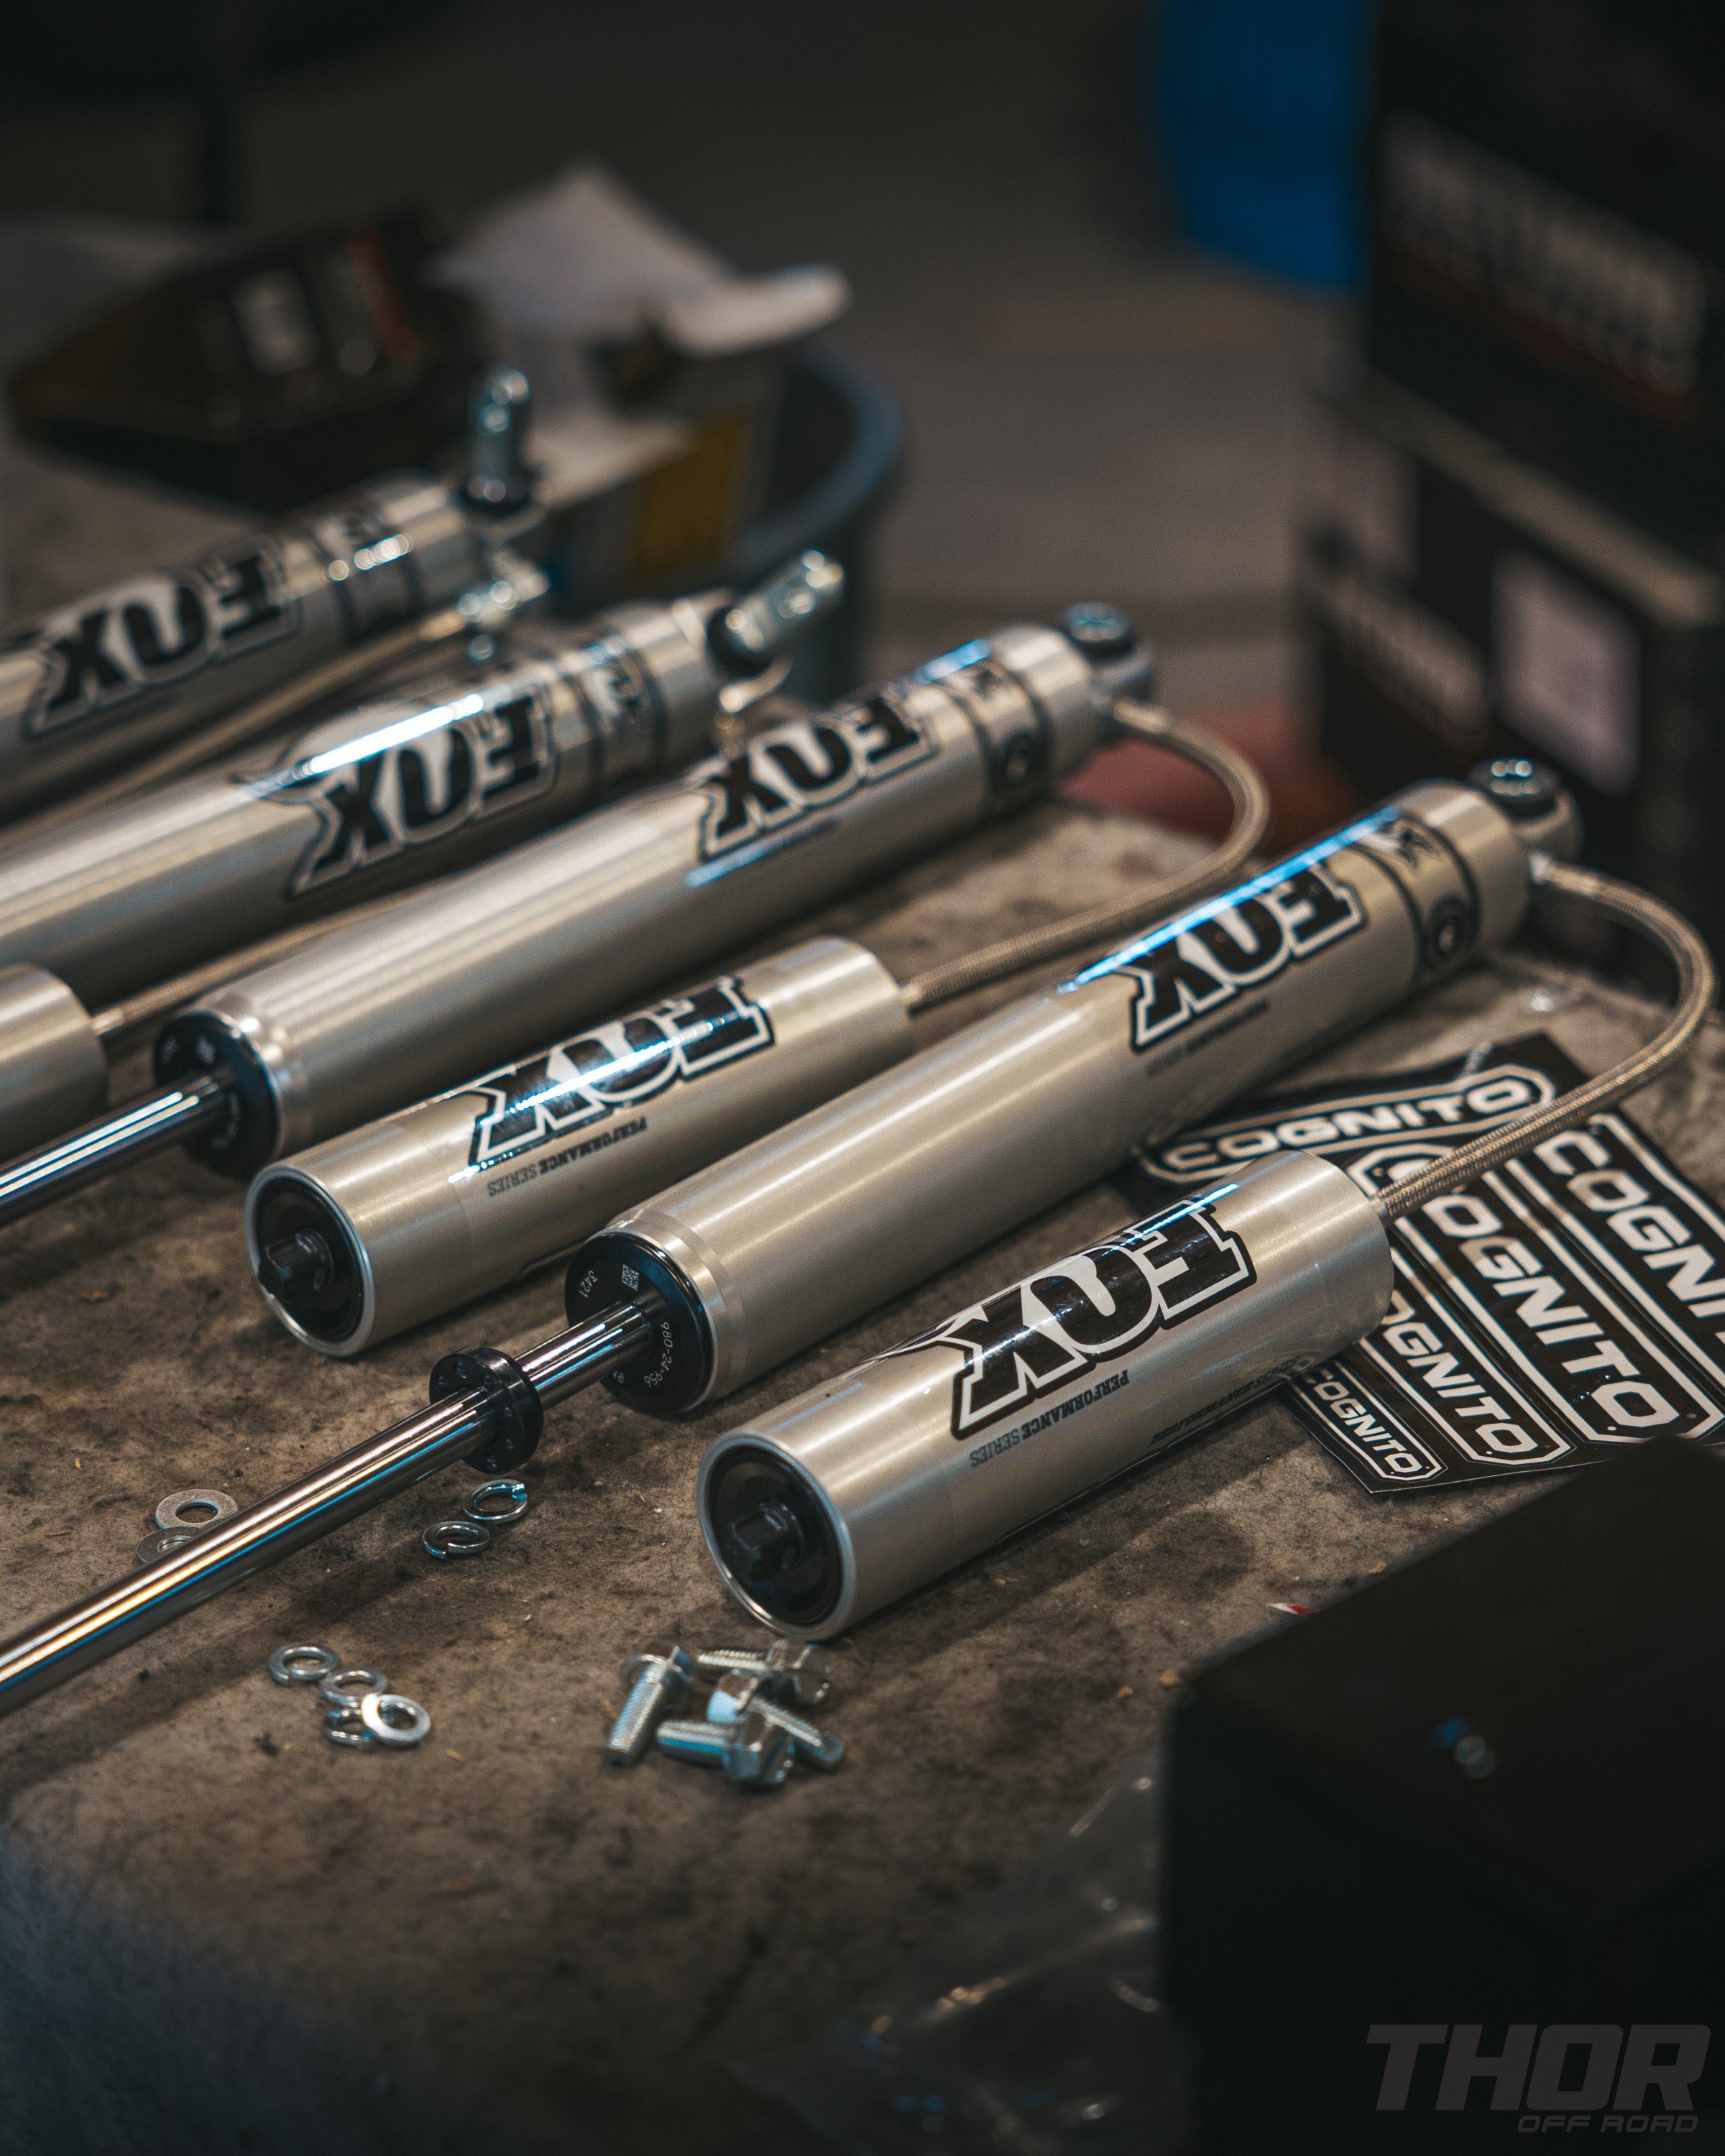 Fox shocks waiting to be installed